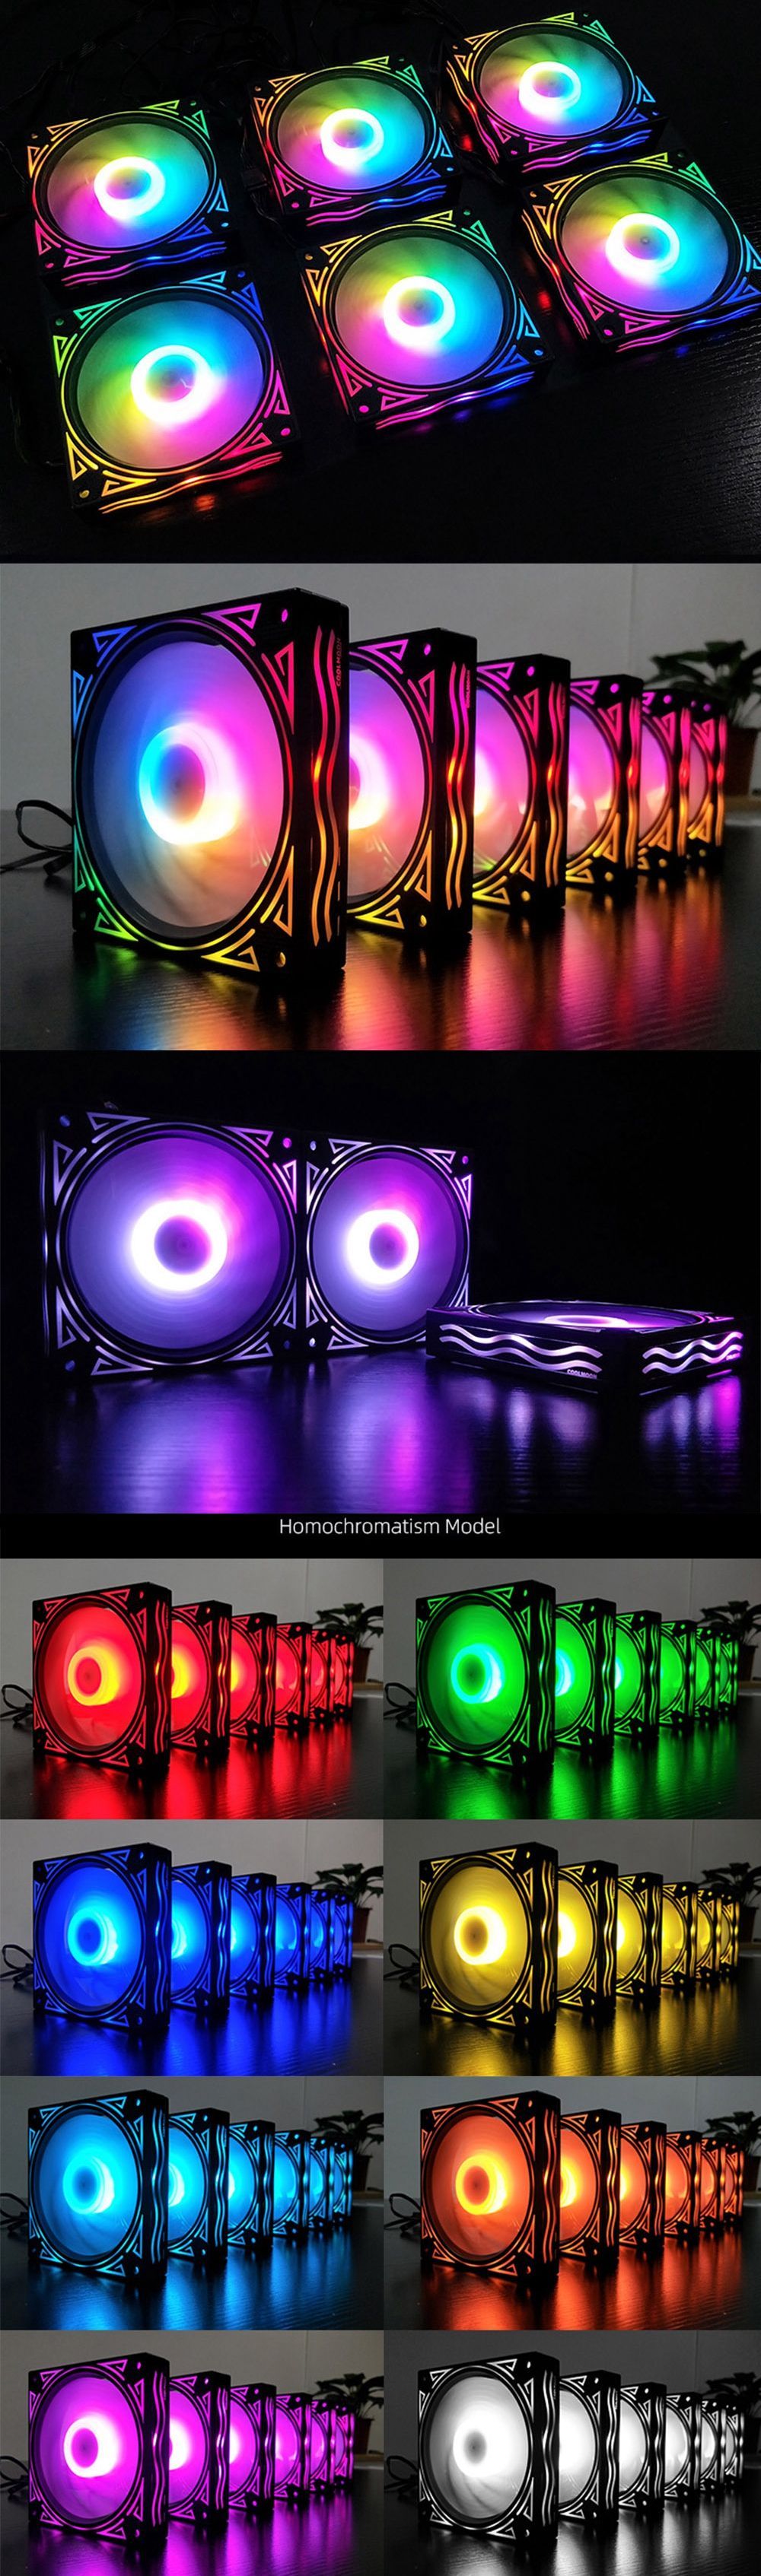 Coolmoon-BILLOW-5PCS-Colorful-Backlight-120mm-CPU-Cooling-Fan-Mute-PC-Heatsink-with-the-Remote-Contr-1580327